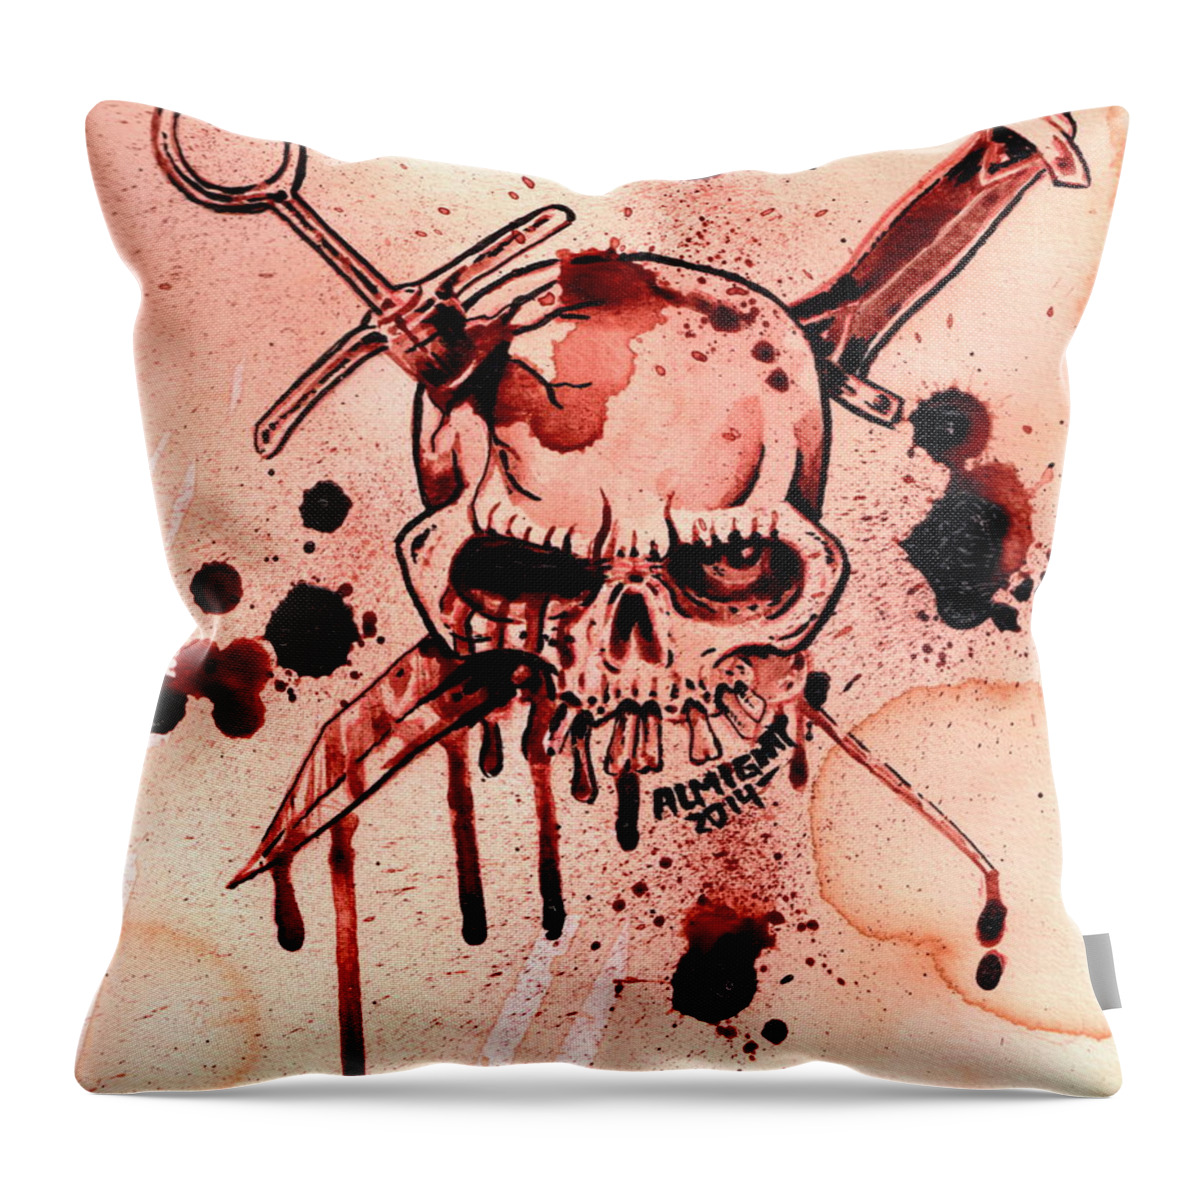  Throw Pillow featuring the painting GG Allin / Murder Junkies Logo by Ryan Almighty